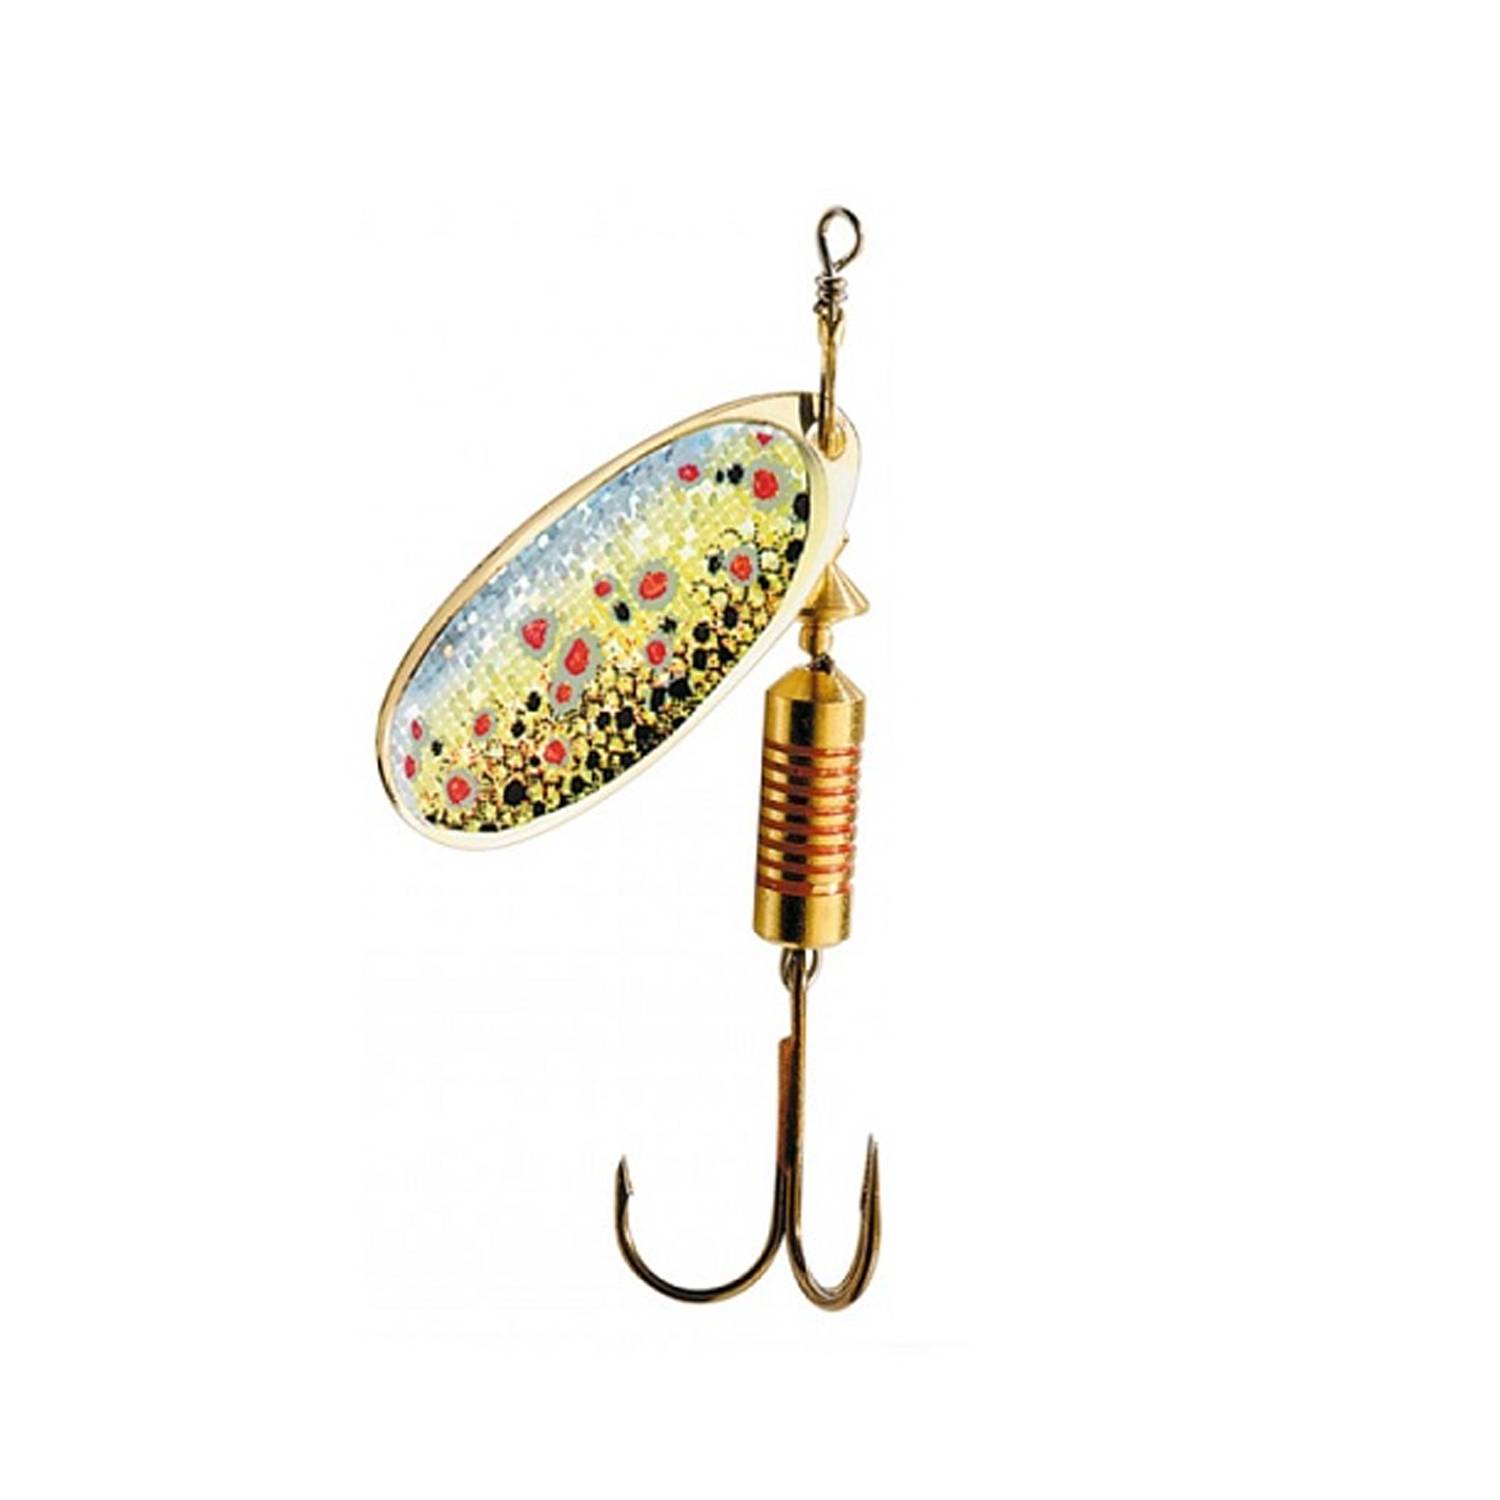 RAPALA SPINNER DAM NATURE 3D BROWN TROUT 4 10GR